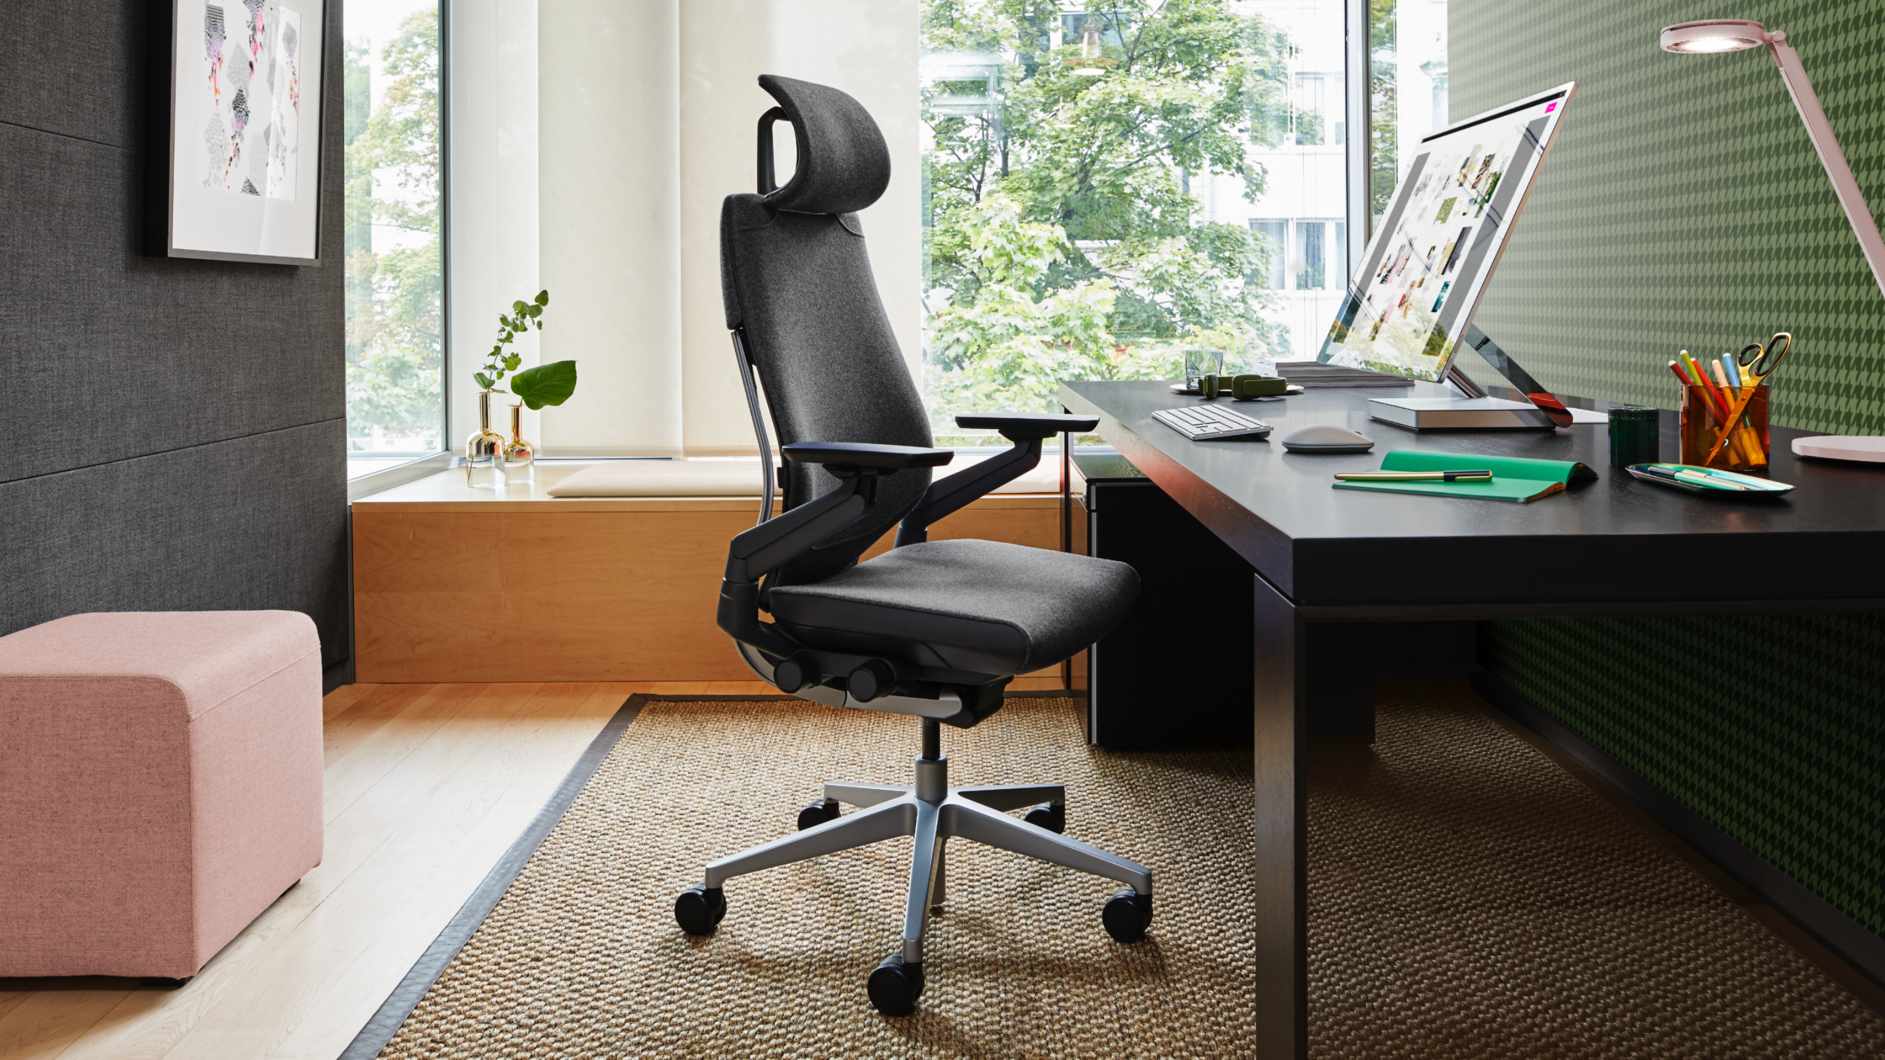 Steelcase Steelcase Gesture office home Chair in great condition 9 stock FREE DELIVERY 